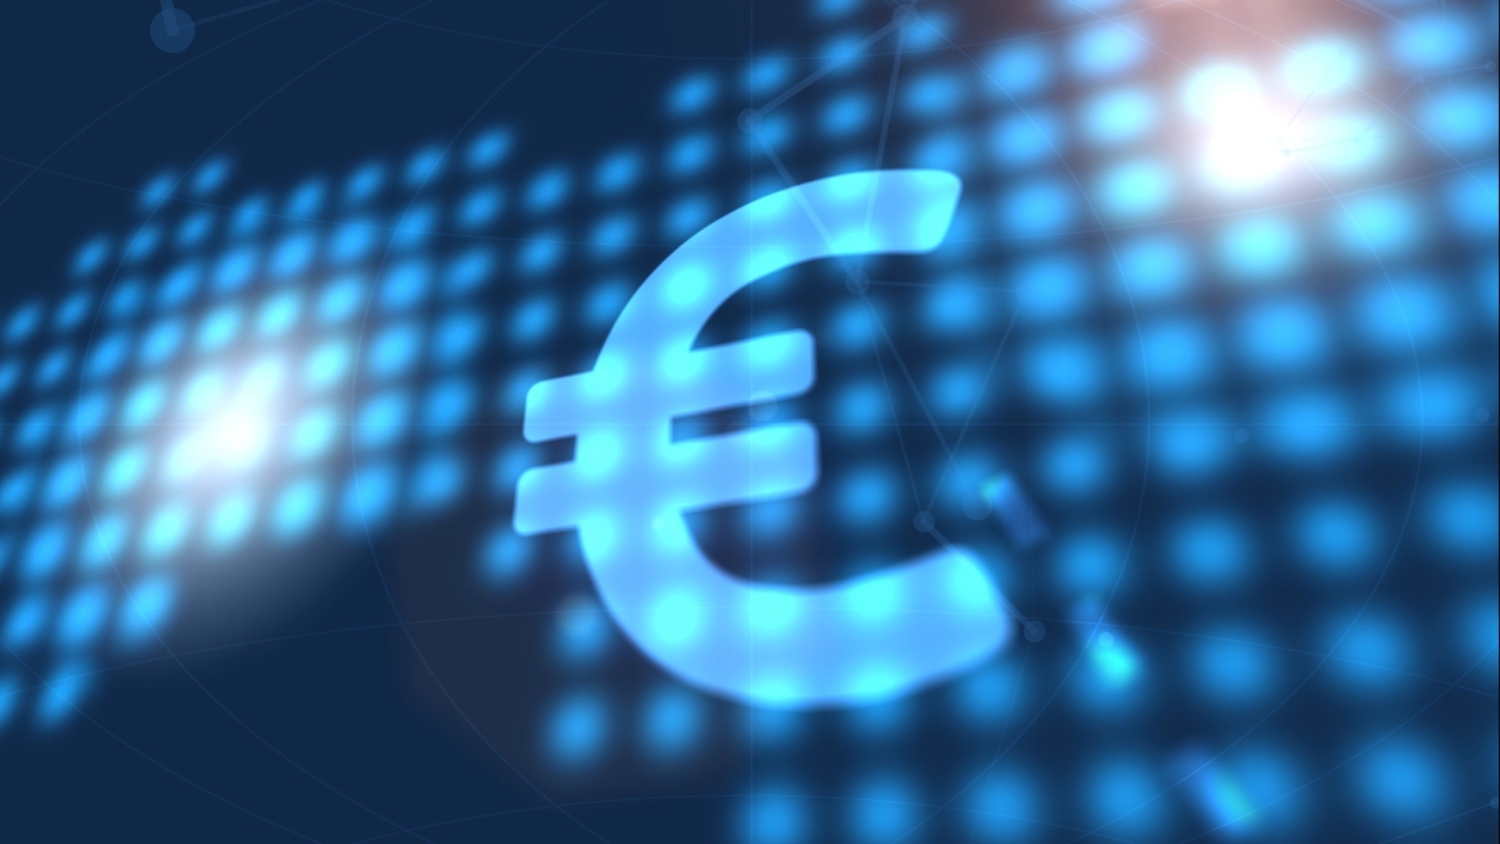 blue-background-with-sign-that-says-euro